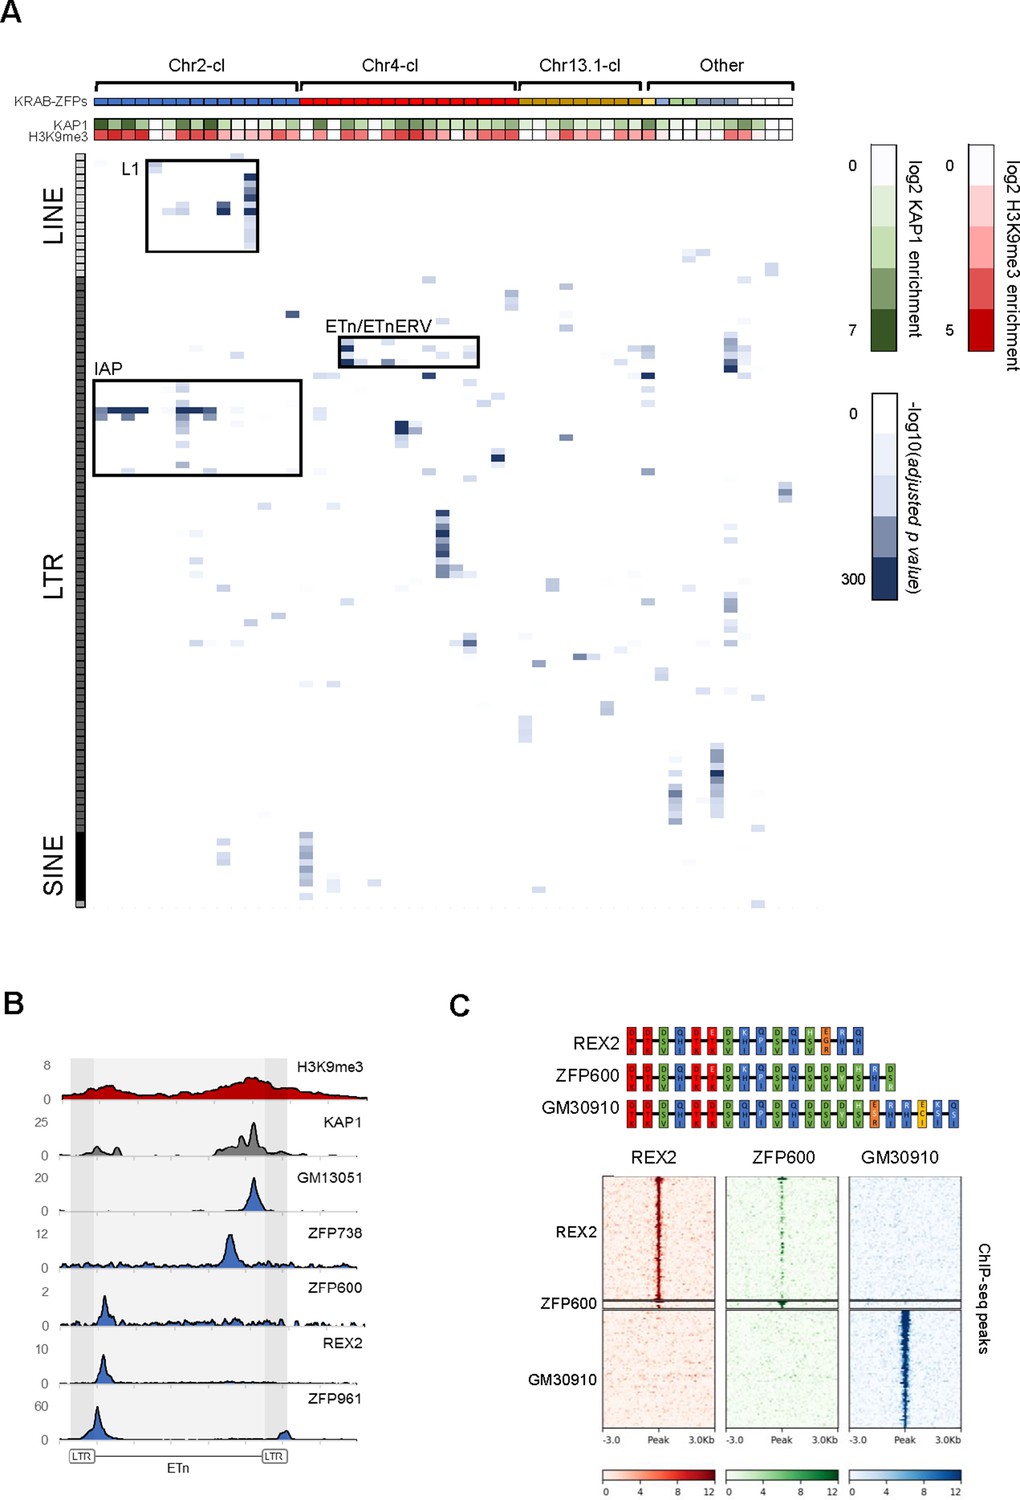 KRAB-zinc finger protein gene expansion in response to active 